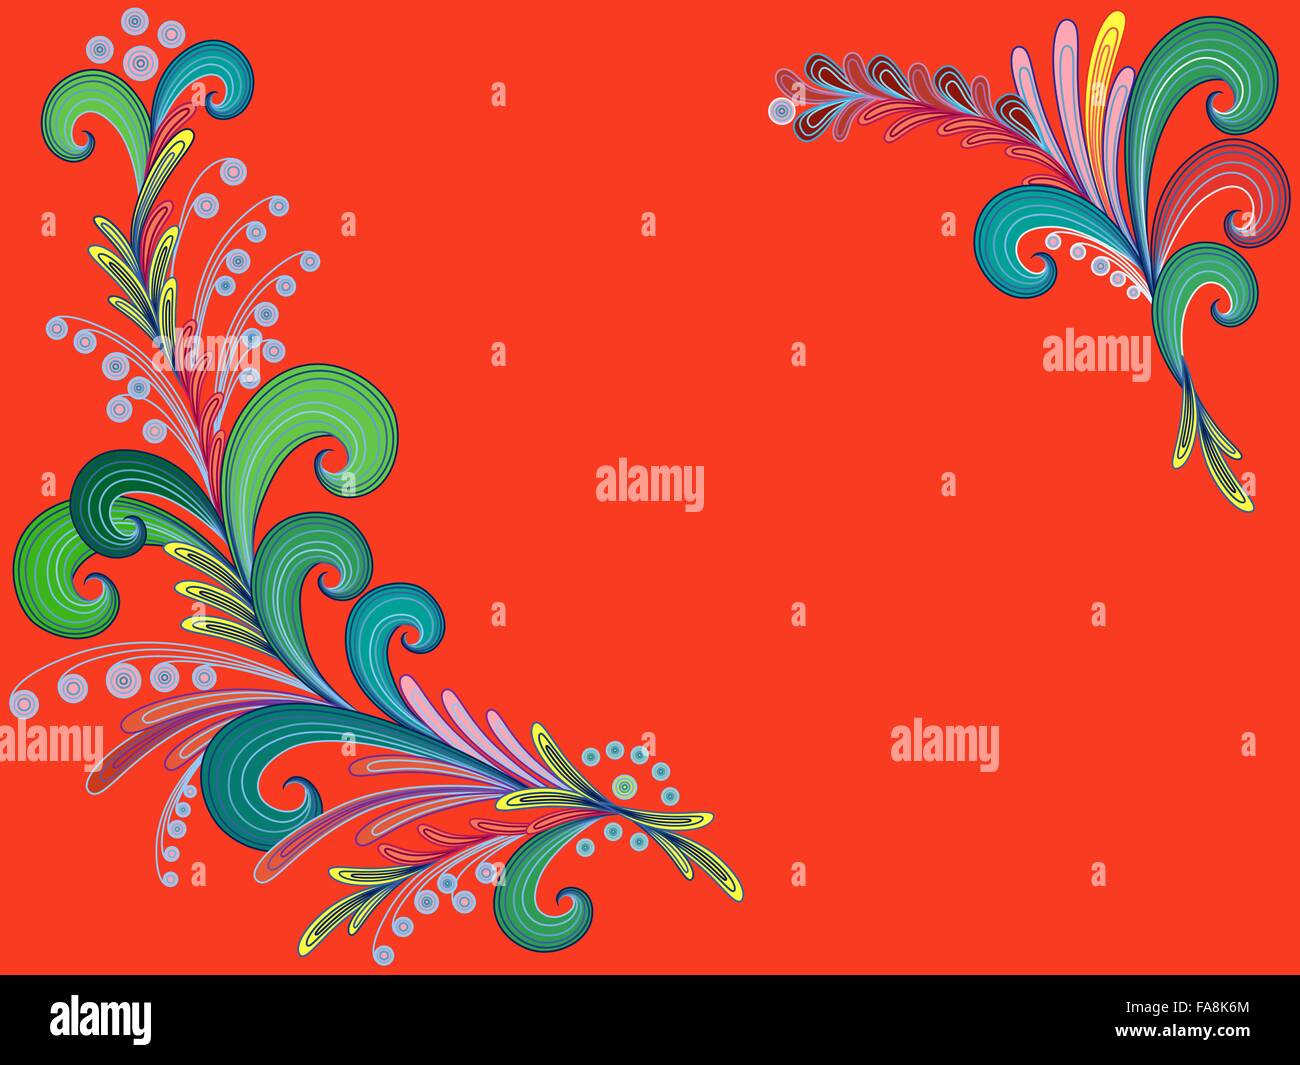 Abstract floral greeting card with beautiful colorful stylized flowers on an orange background, hand drawing vector illustration Stock Vector